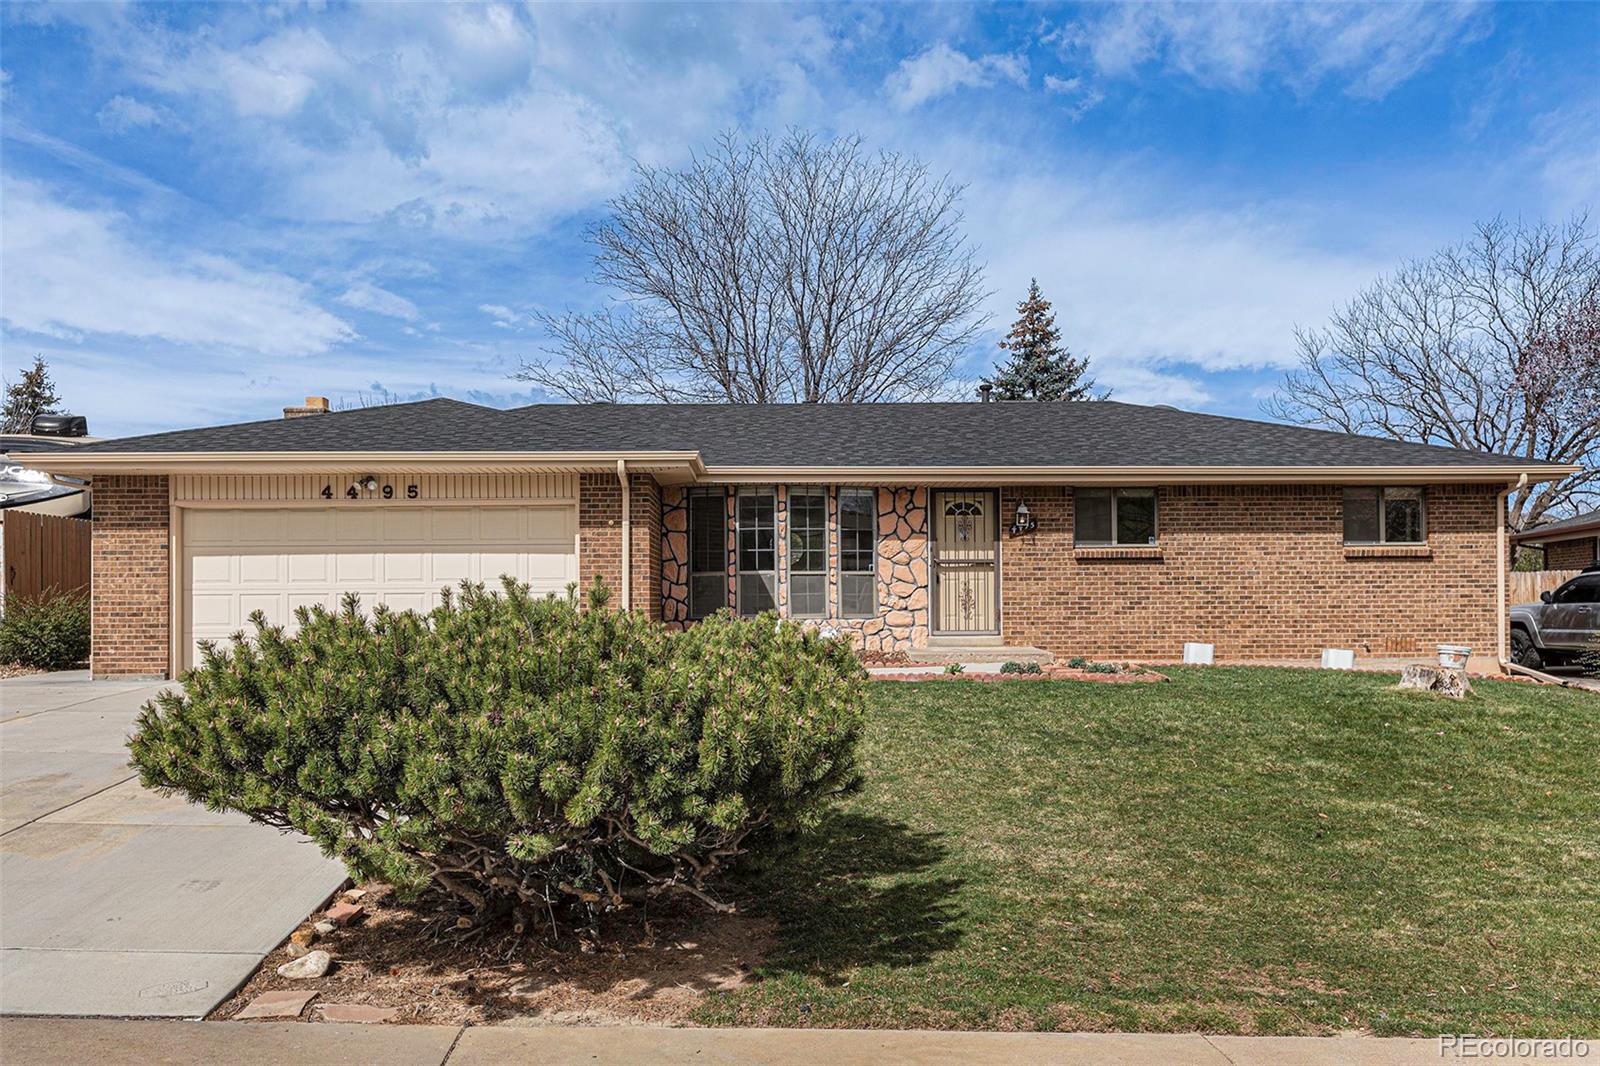 Report Image for 4495 S Routt Street,Littleton, Colorado